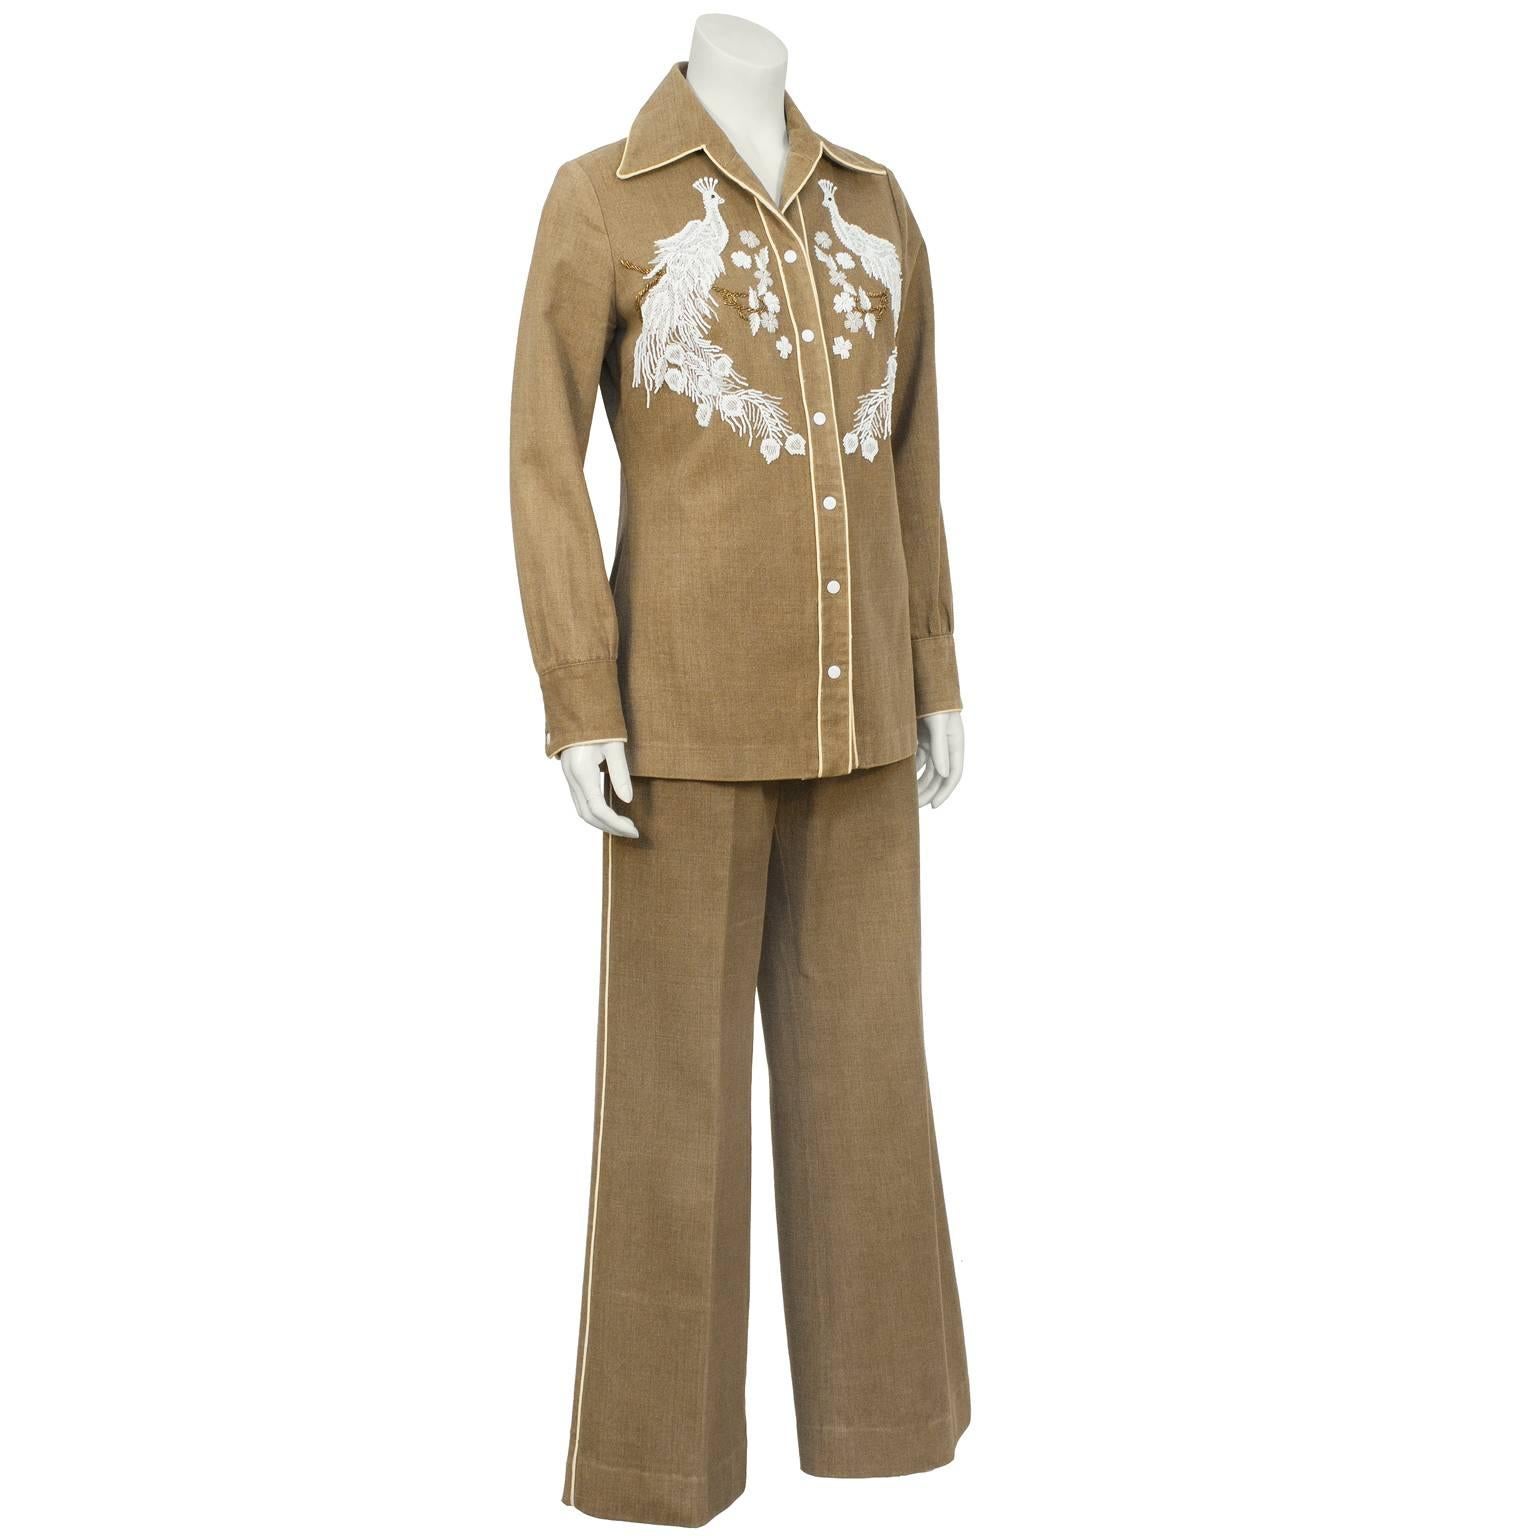 1960's ladies Western pant set in brushed brown denim with hand beaded white and silver peacocks seated on gold beaded branch. Not for the timid! In excellent condition piped in contracting soft yellow with all the bells and whistles of a fine